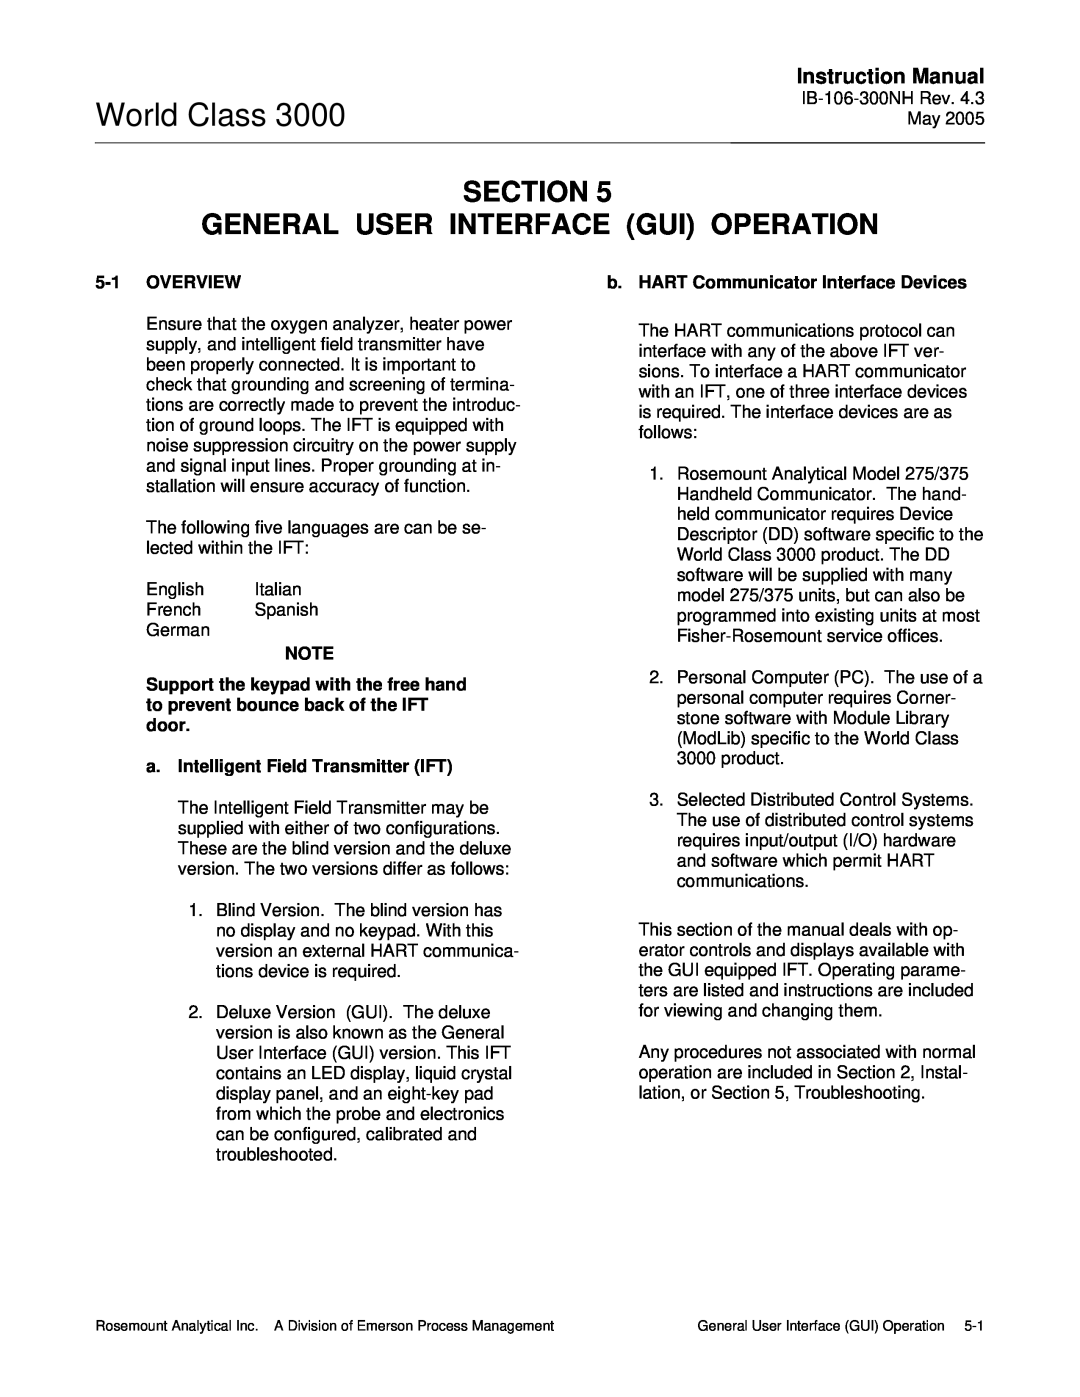 Emerson 3000 instruction manual Section General User Interface Gui Operation, World Class, Instruction Manual, 5-1OVERVIEW 